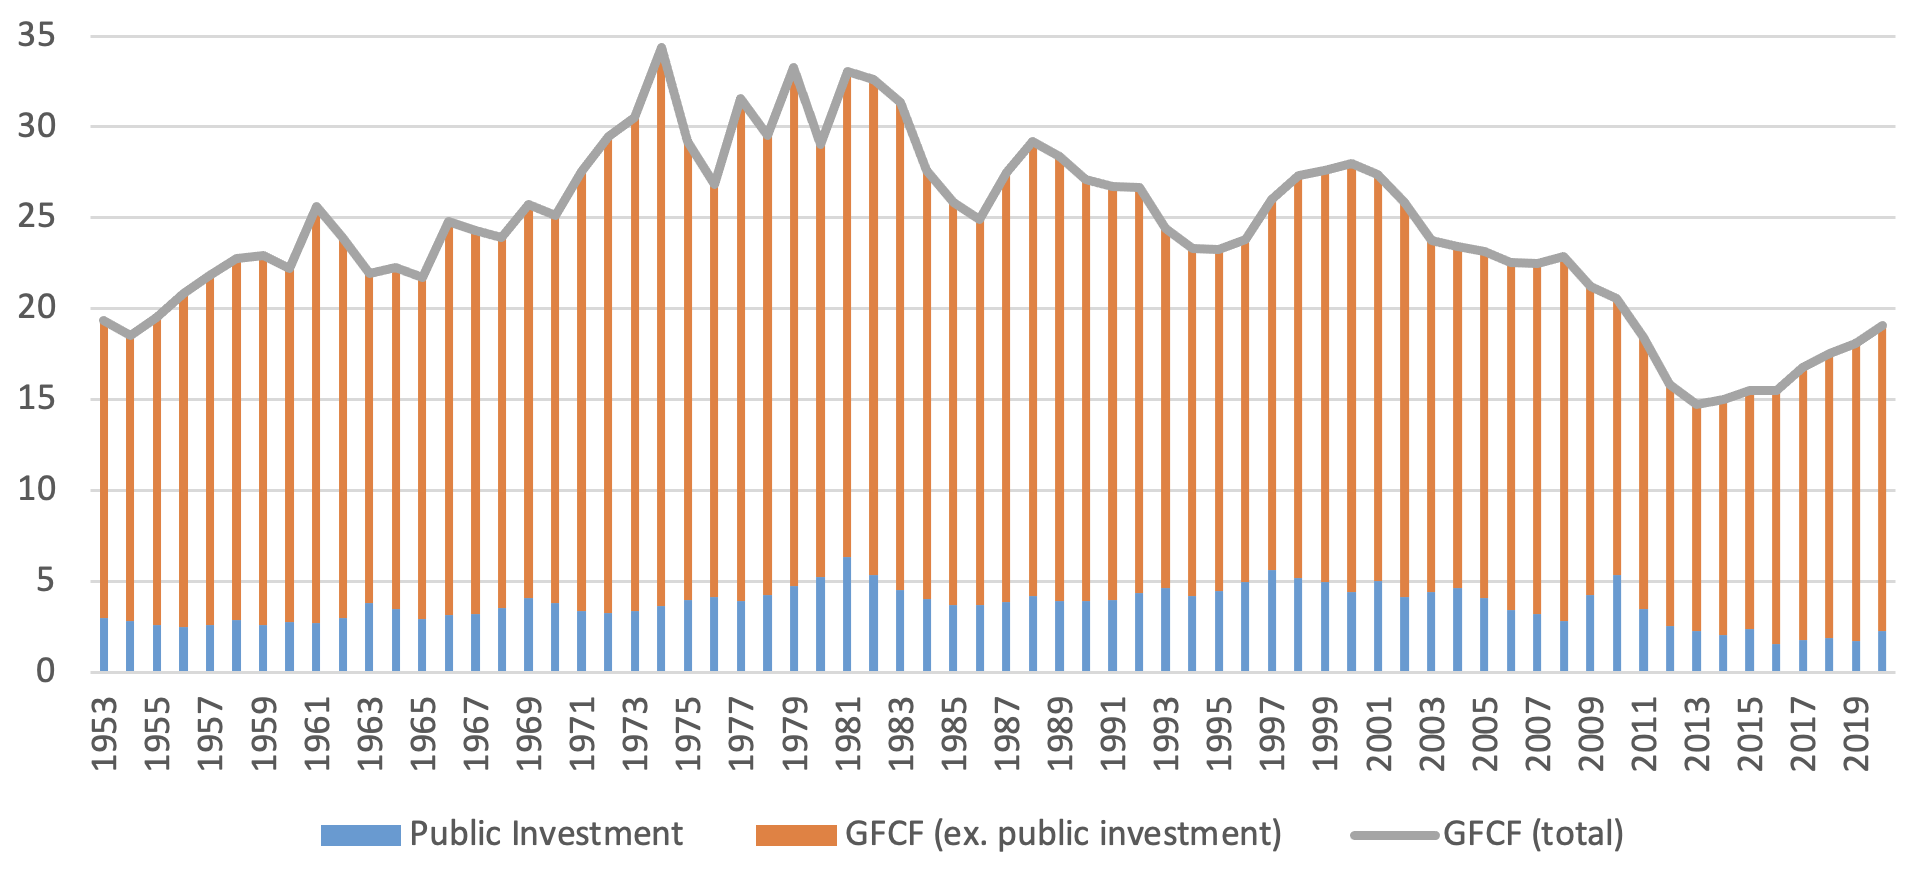 Figure 4 Gross fixed capital formation and public investment 